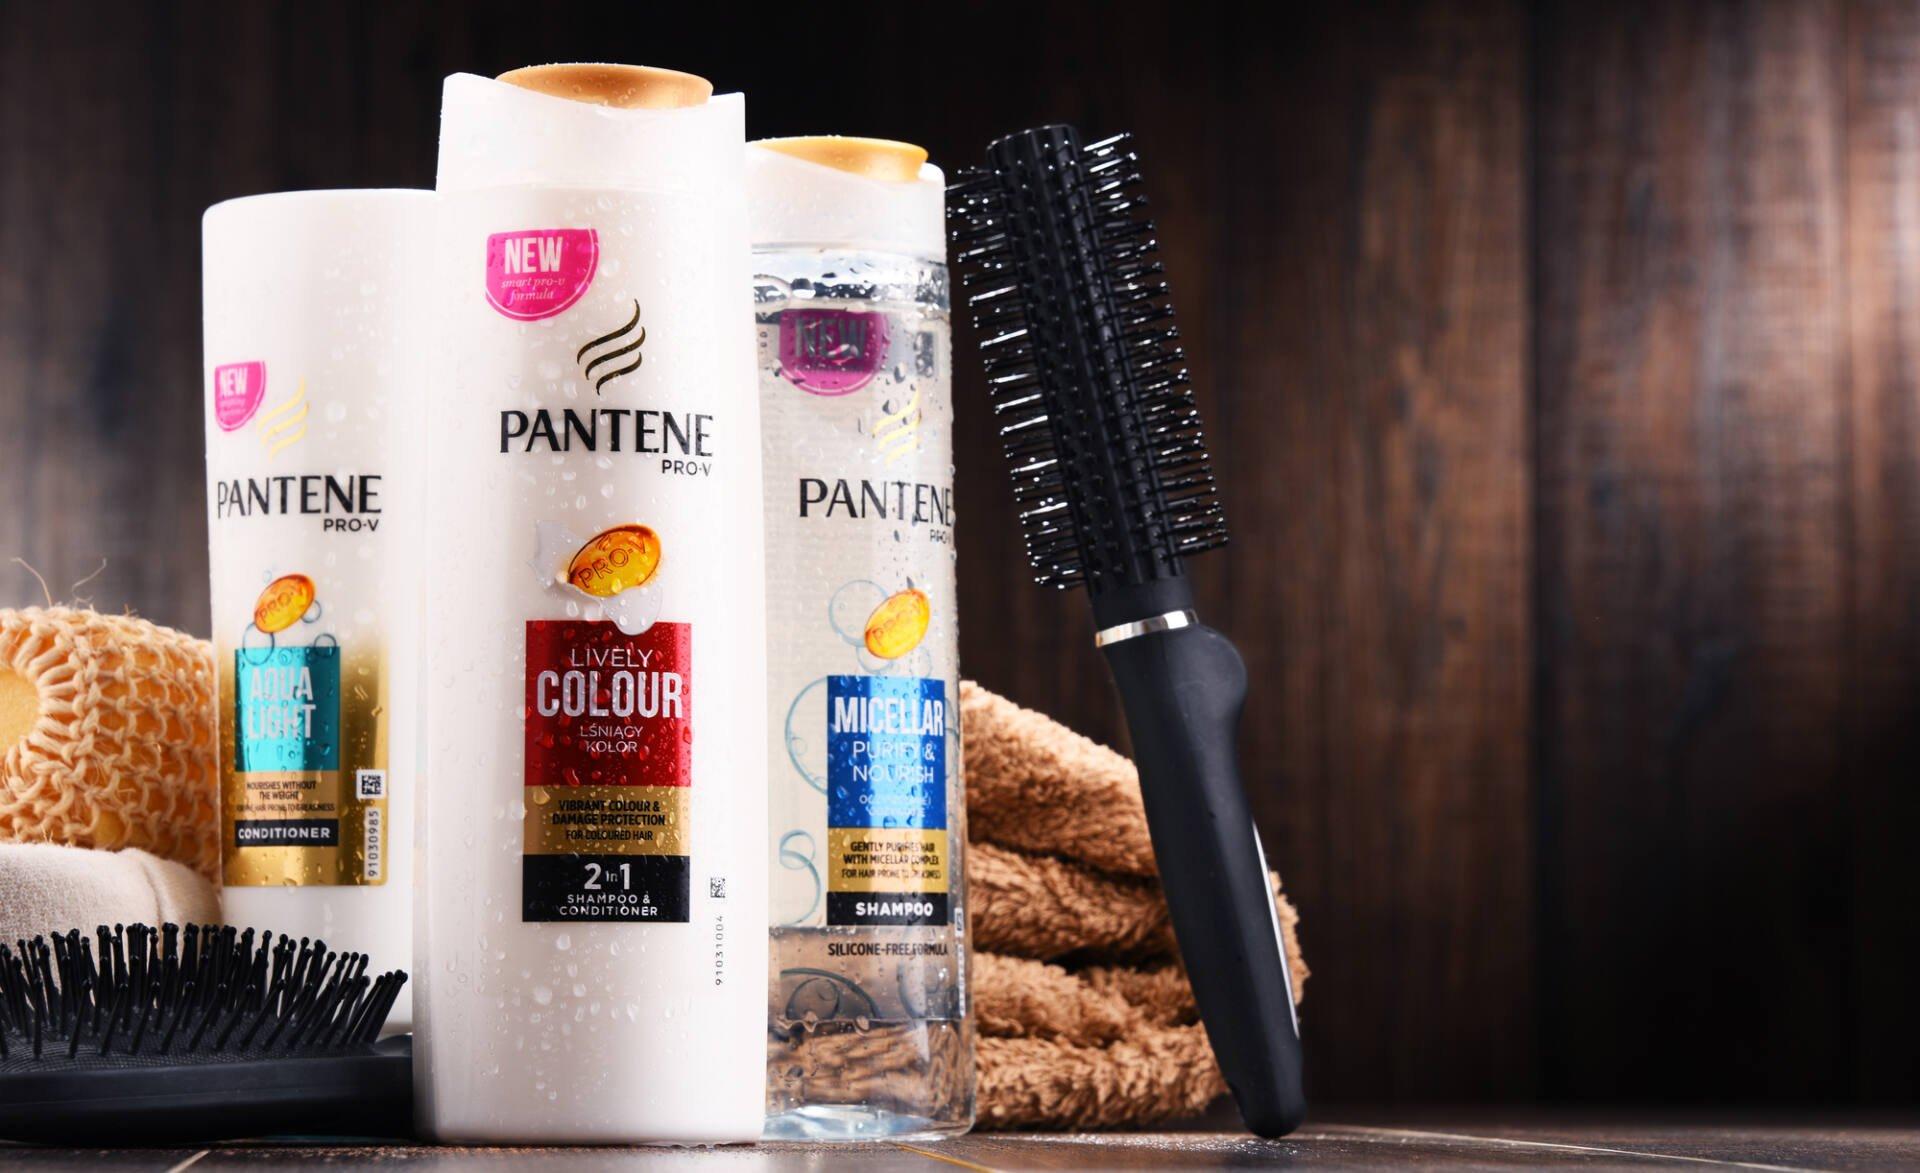 Does Pantene Lead To Hair Care Product Build-Up?